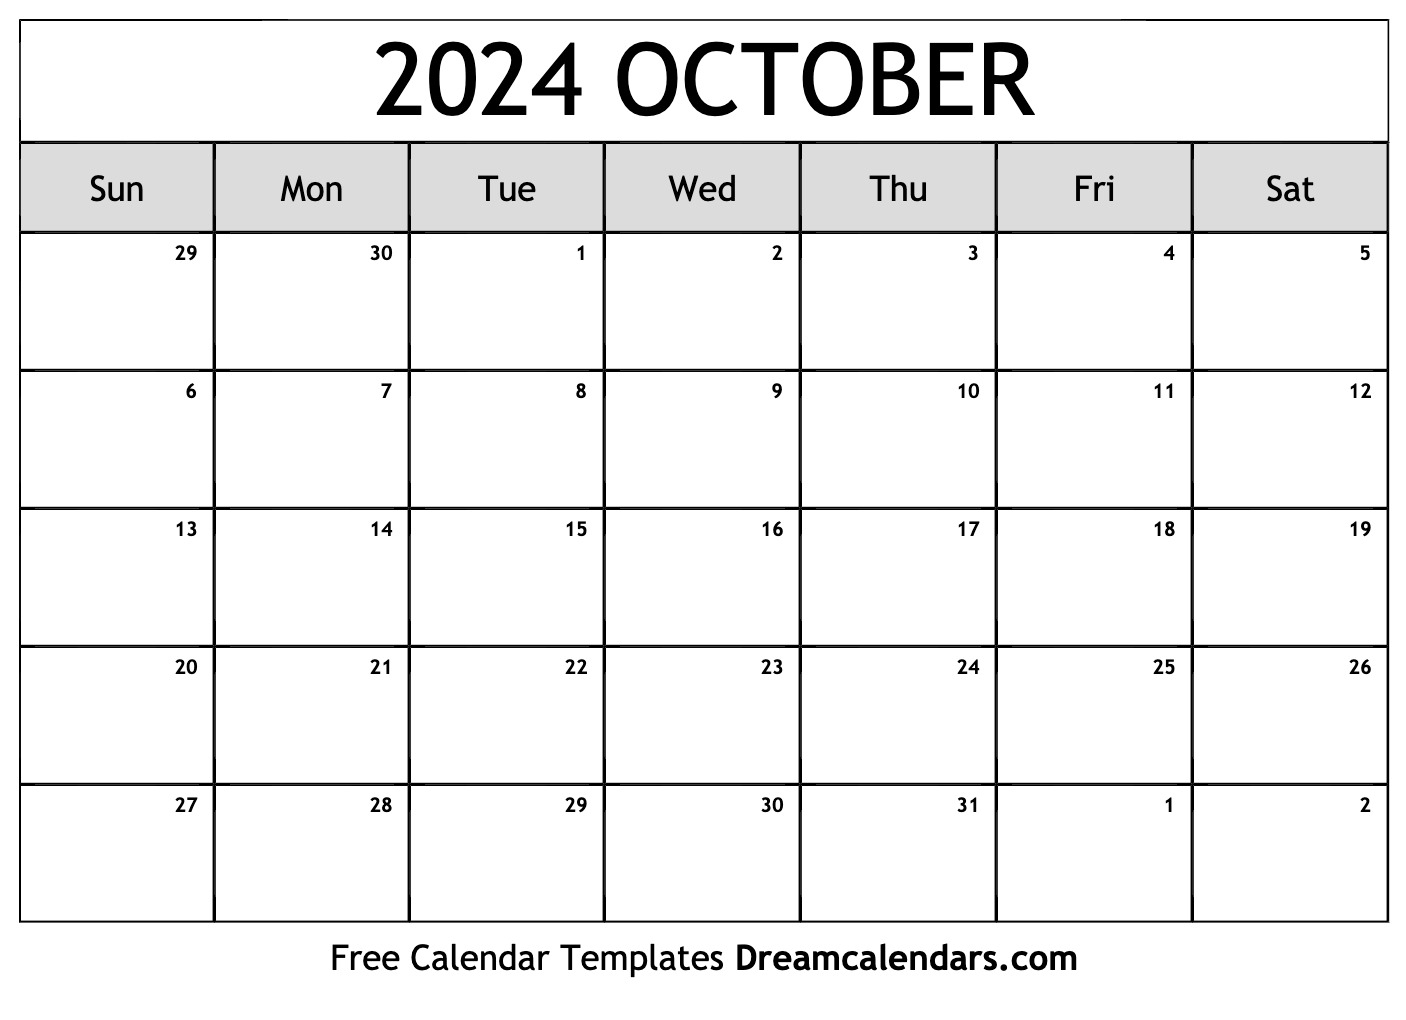 October 2024 Calendar | Free Blank Printable With Holidays for October Printable Calendar 2024